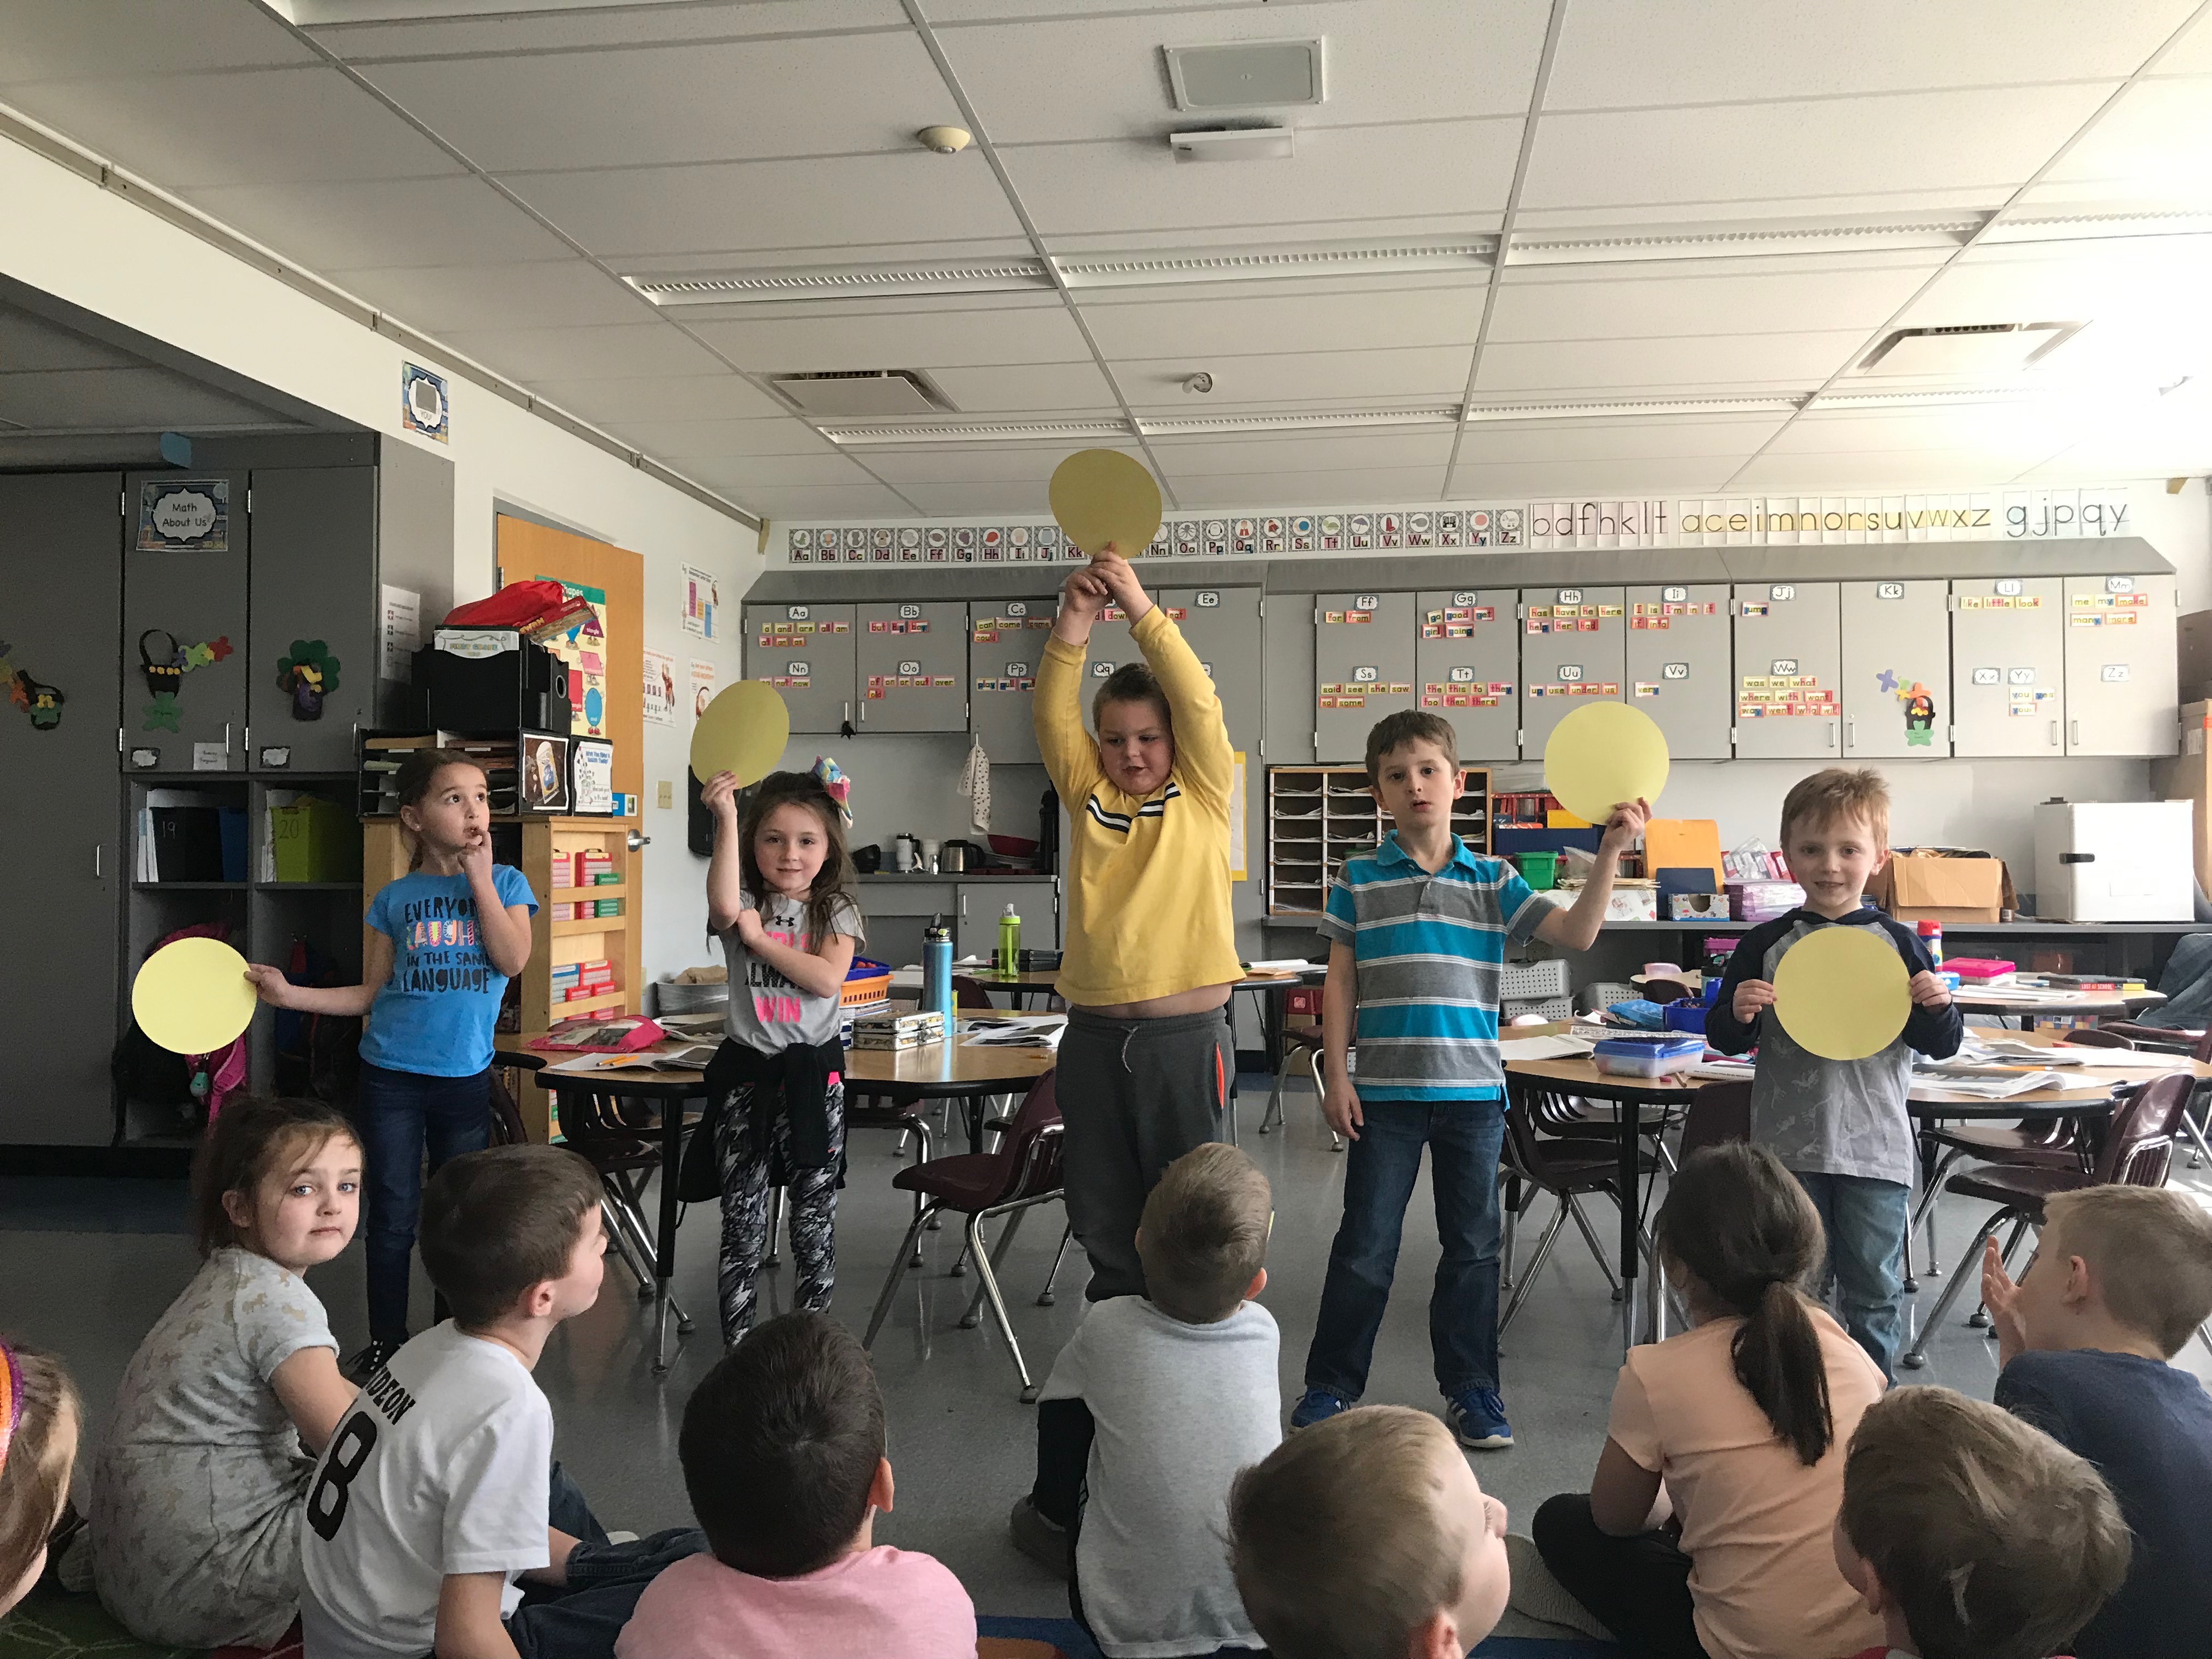 Students predicted the Sun’s motion both by pointing their finger to outline the Sun’s path and by making a class model